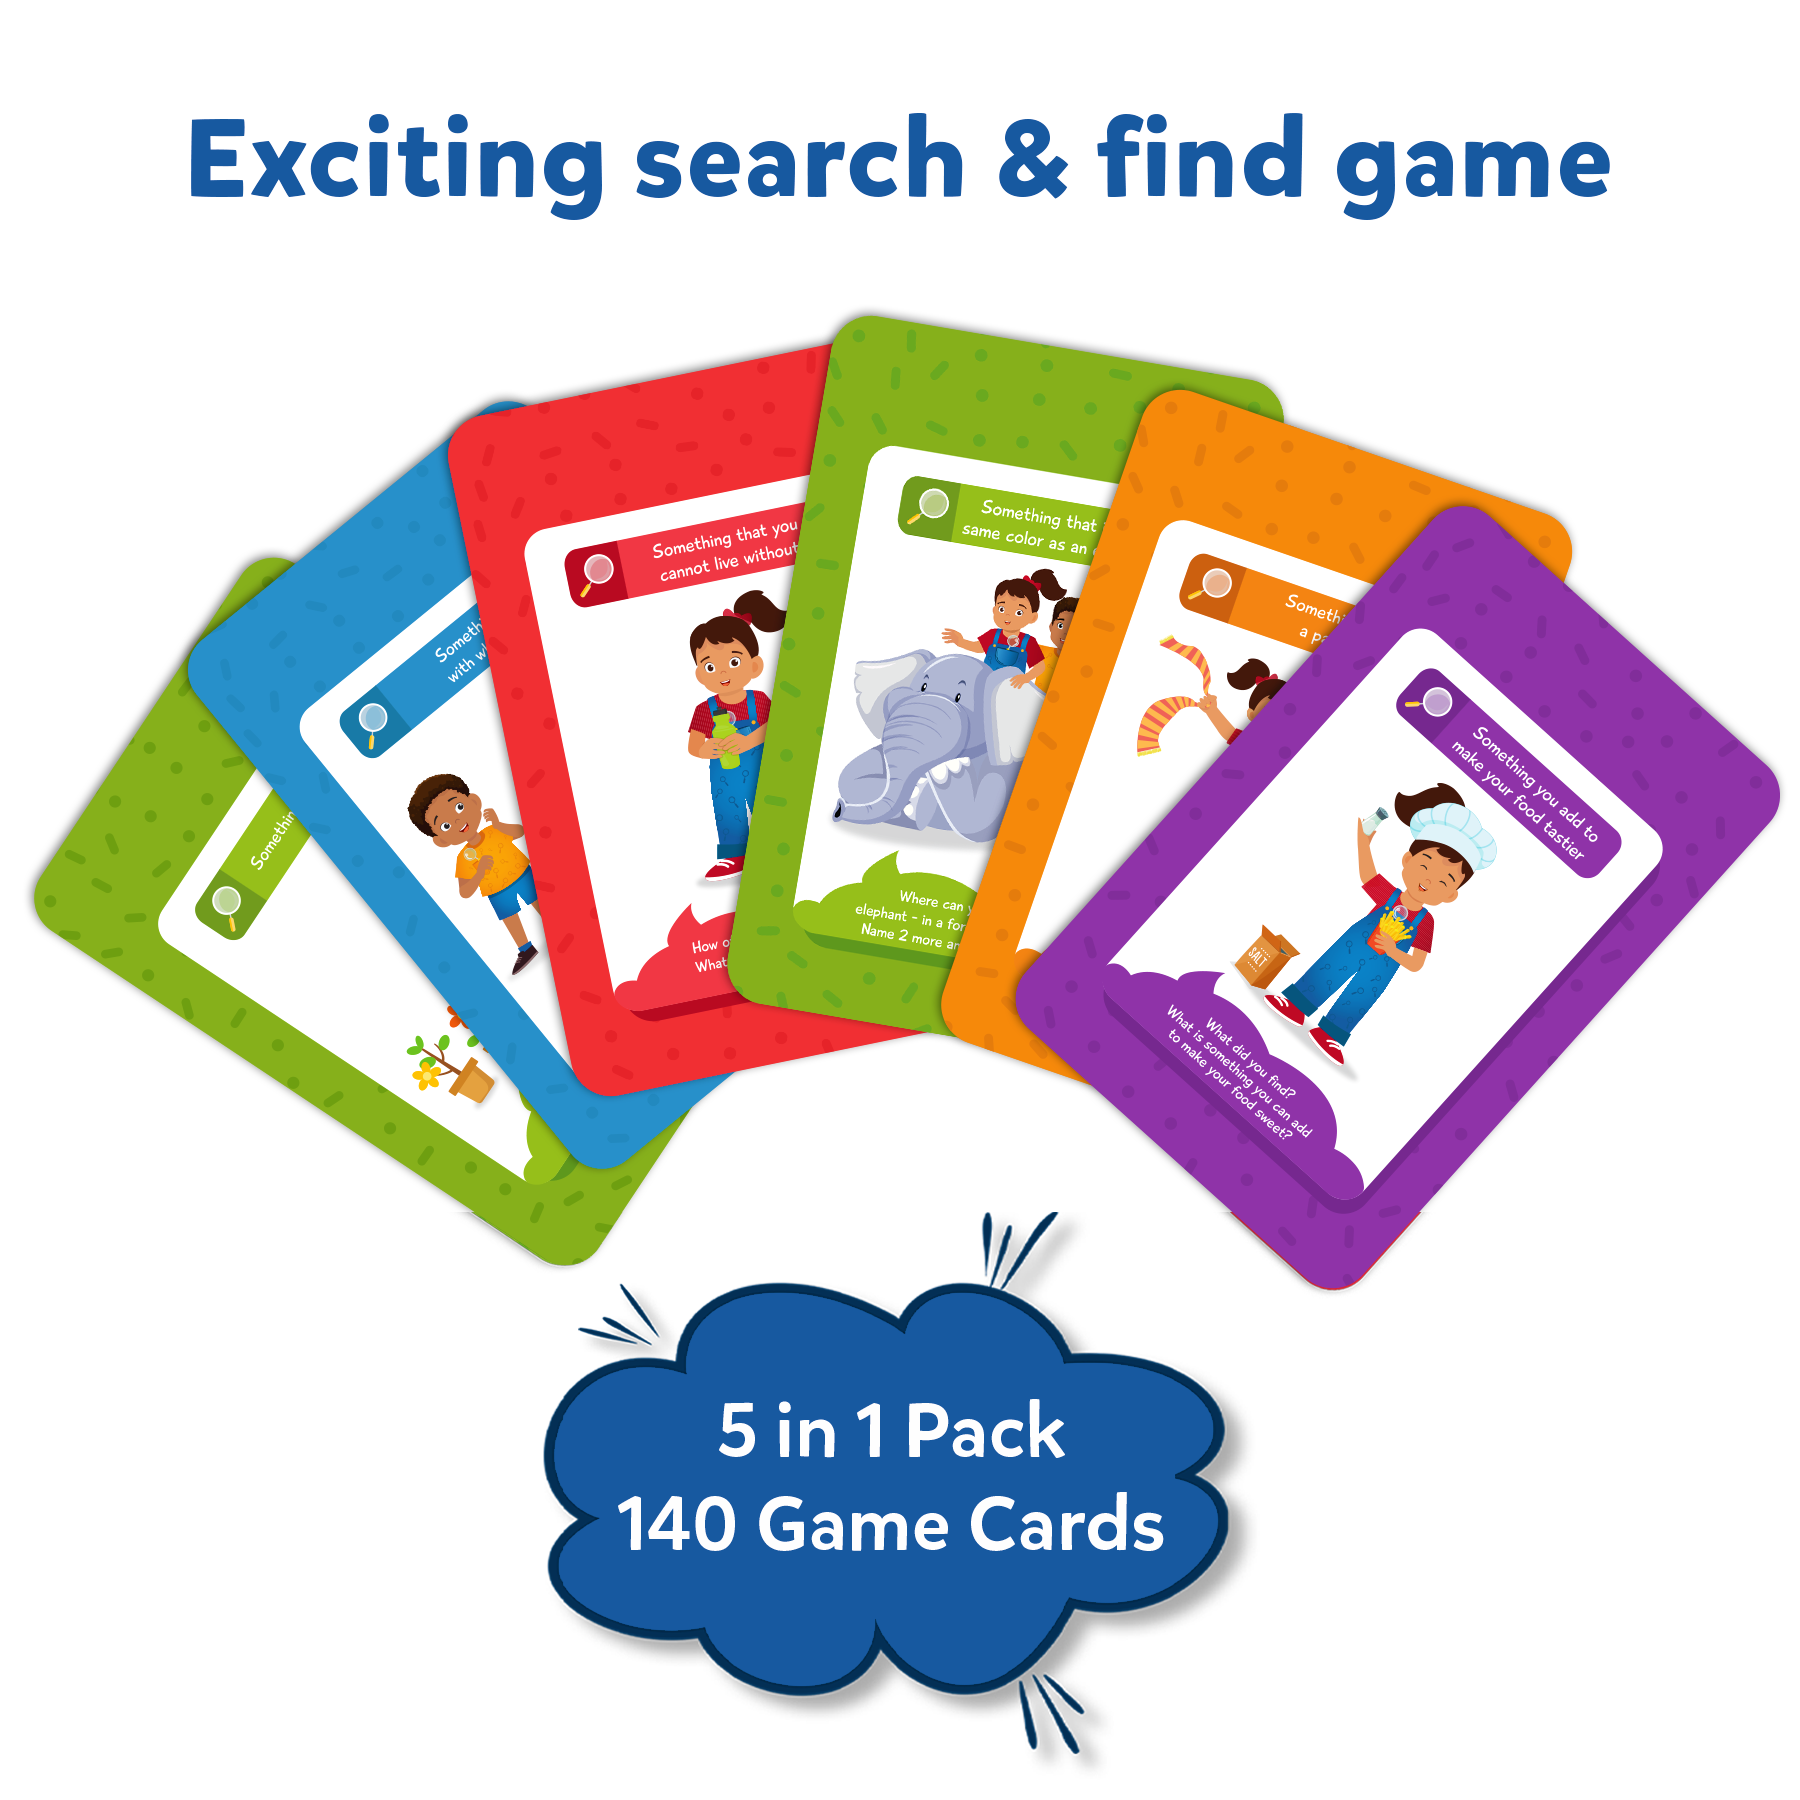 Skillmatics Card Game - Found It 5 in 1 Mega Pack, Scavenger Hunt For Kids, Fun Family Game, Gifts For Ages 4 to 7